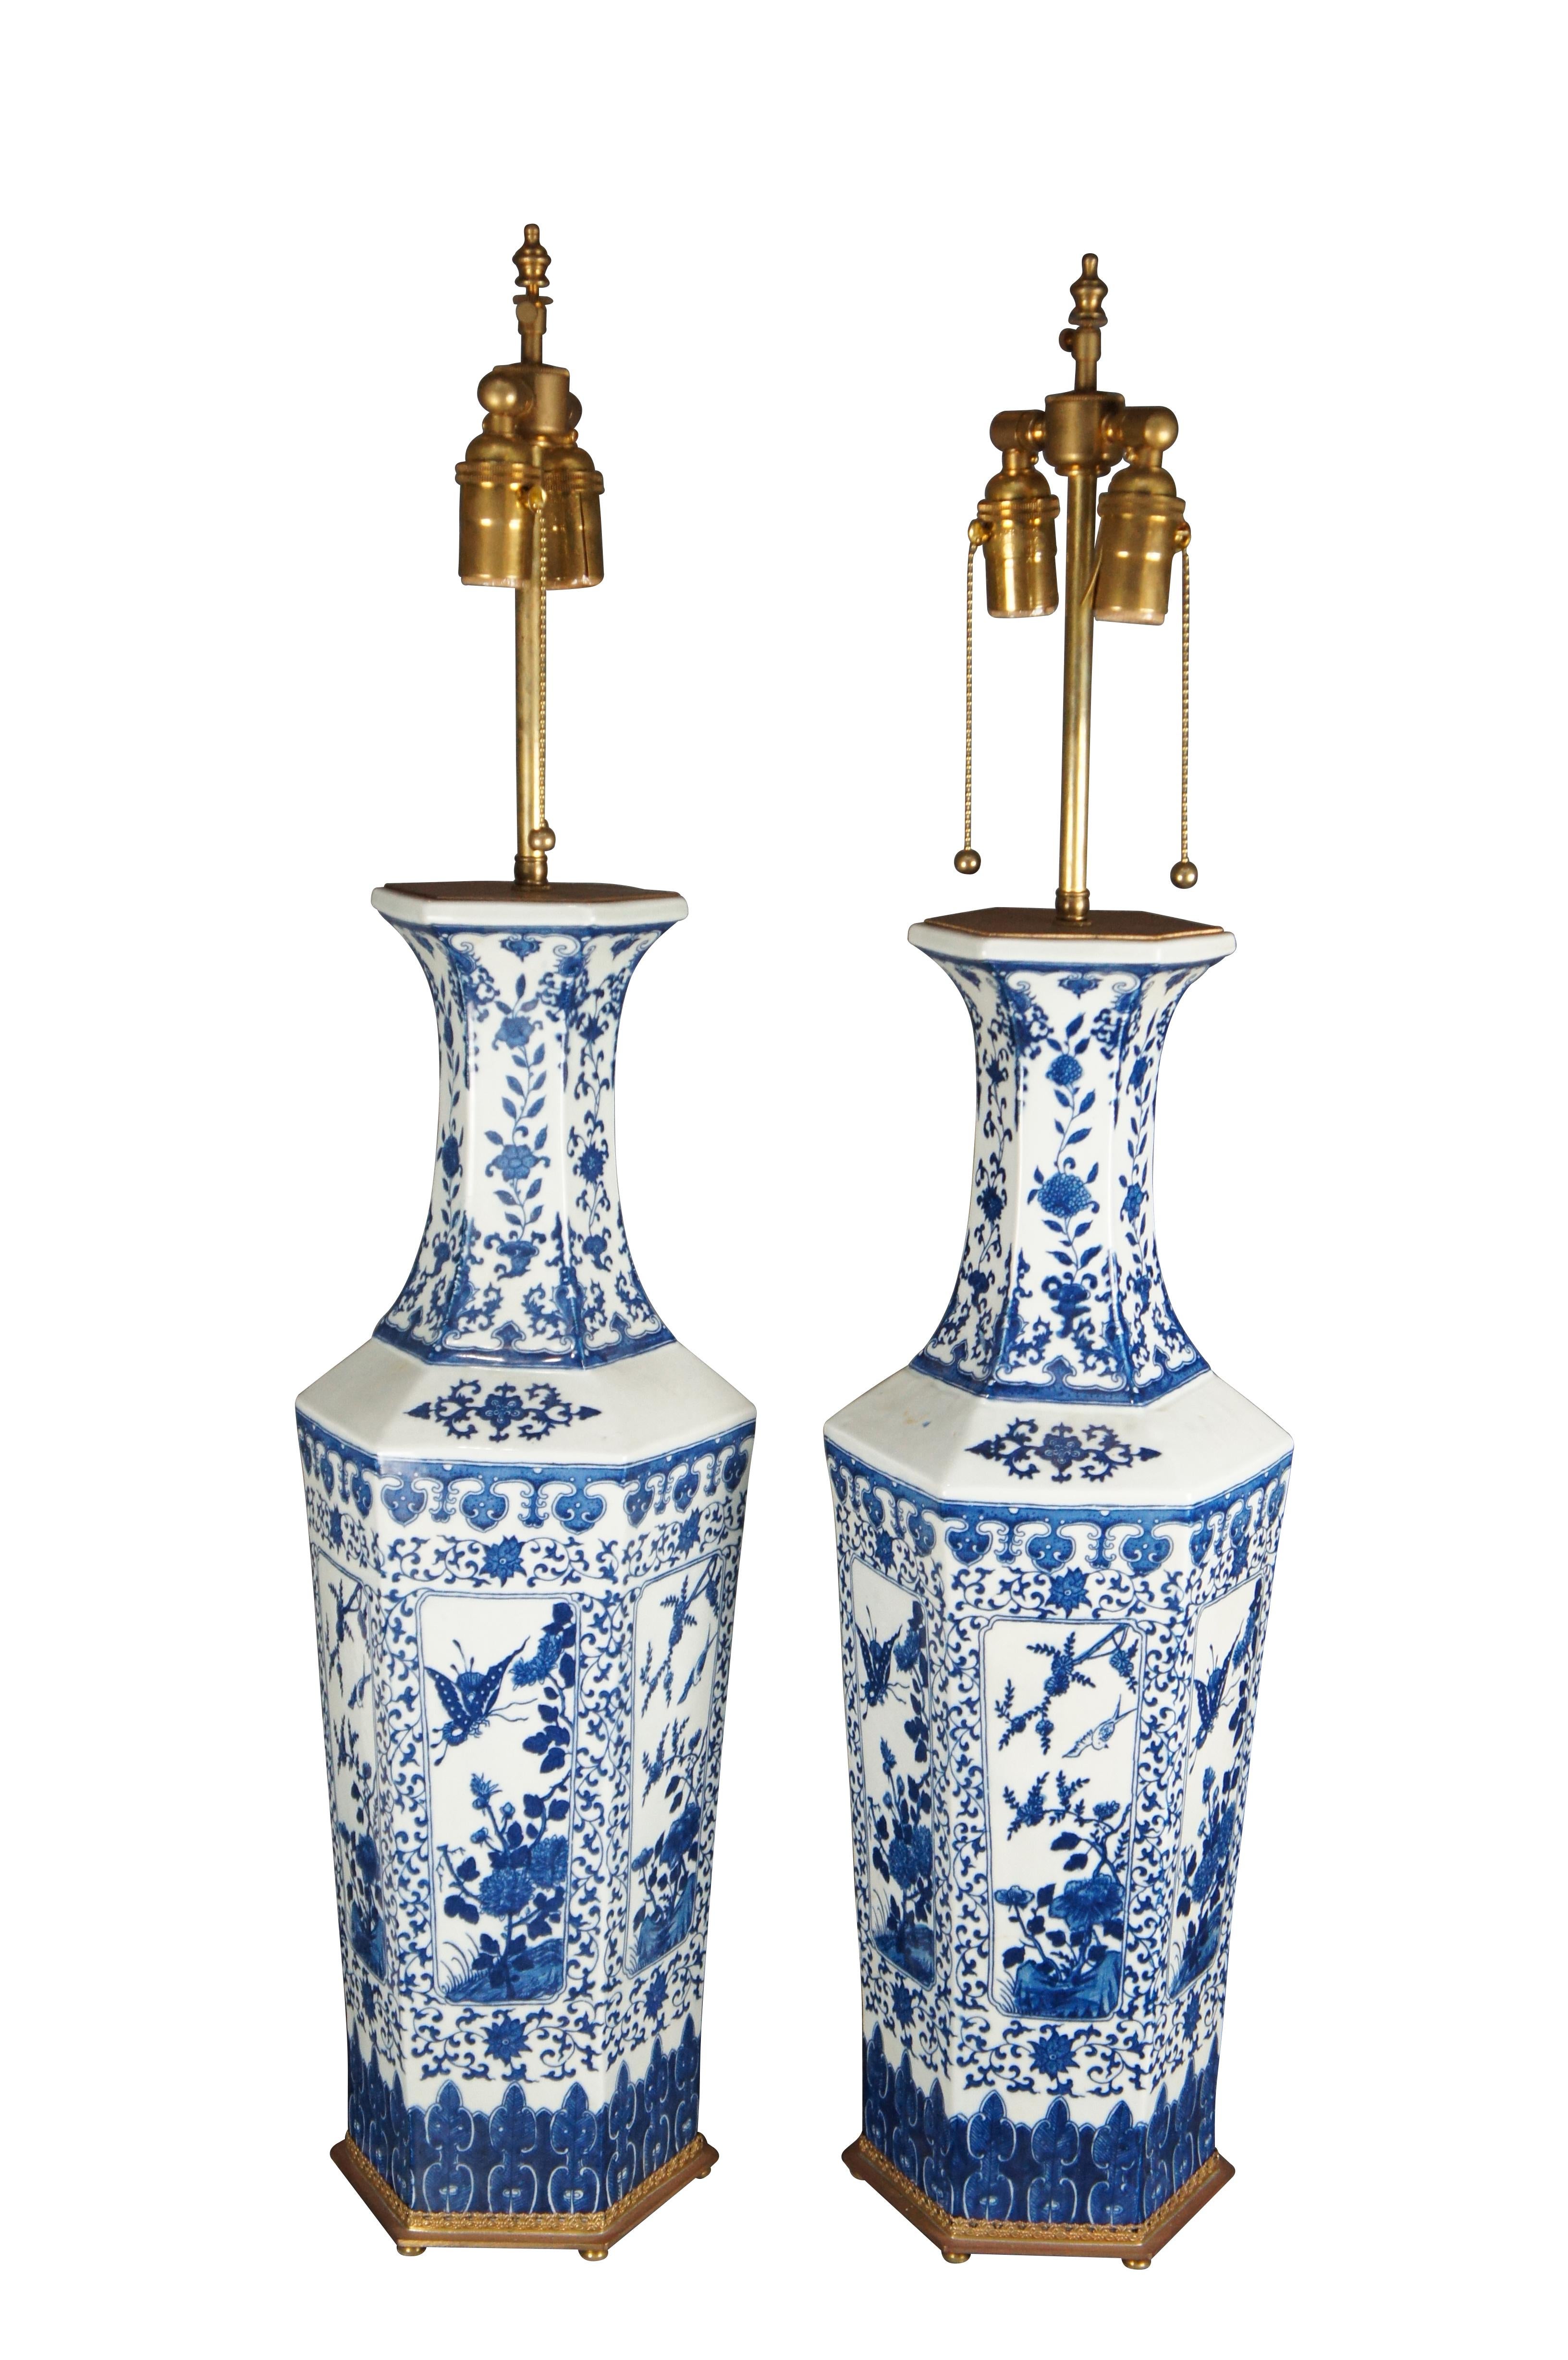 A beautiful pair of Chinese Porcelain Qianlong inspired table lamps. Features a hexagonal form with flared mouth. The vases are white with blue painted nature scenes showcasing an alternating pattern of birds, butterflies and flowers. The foreground